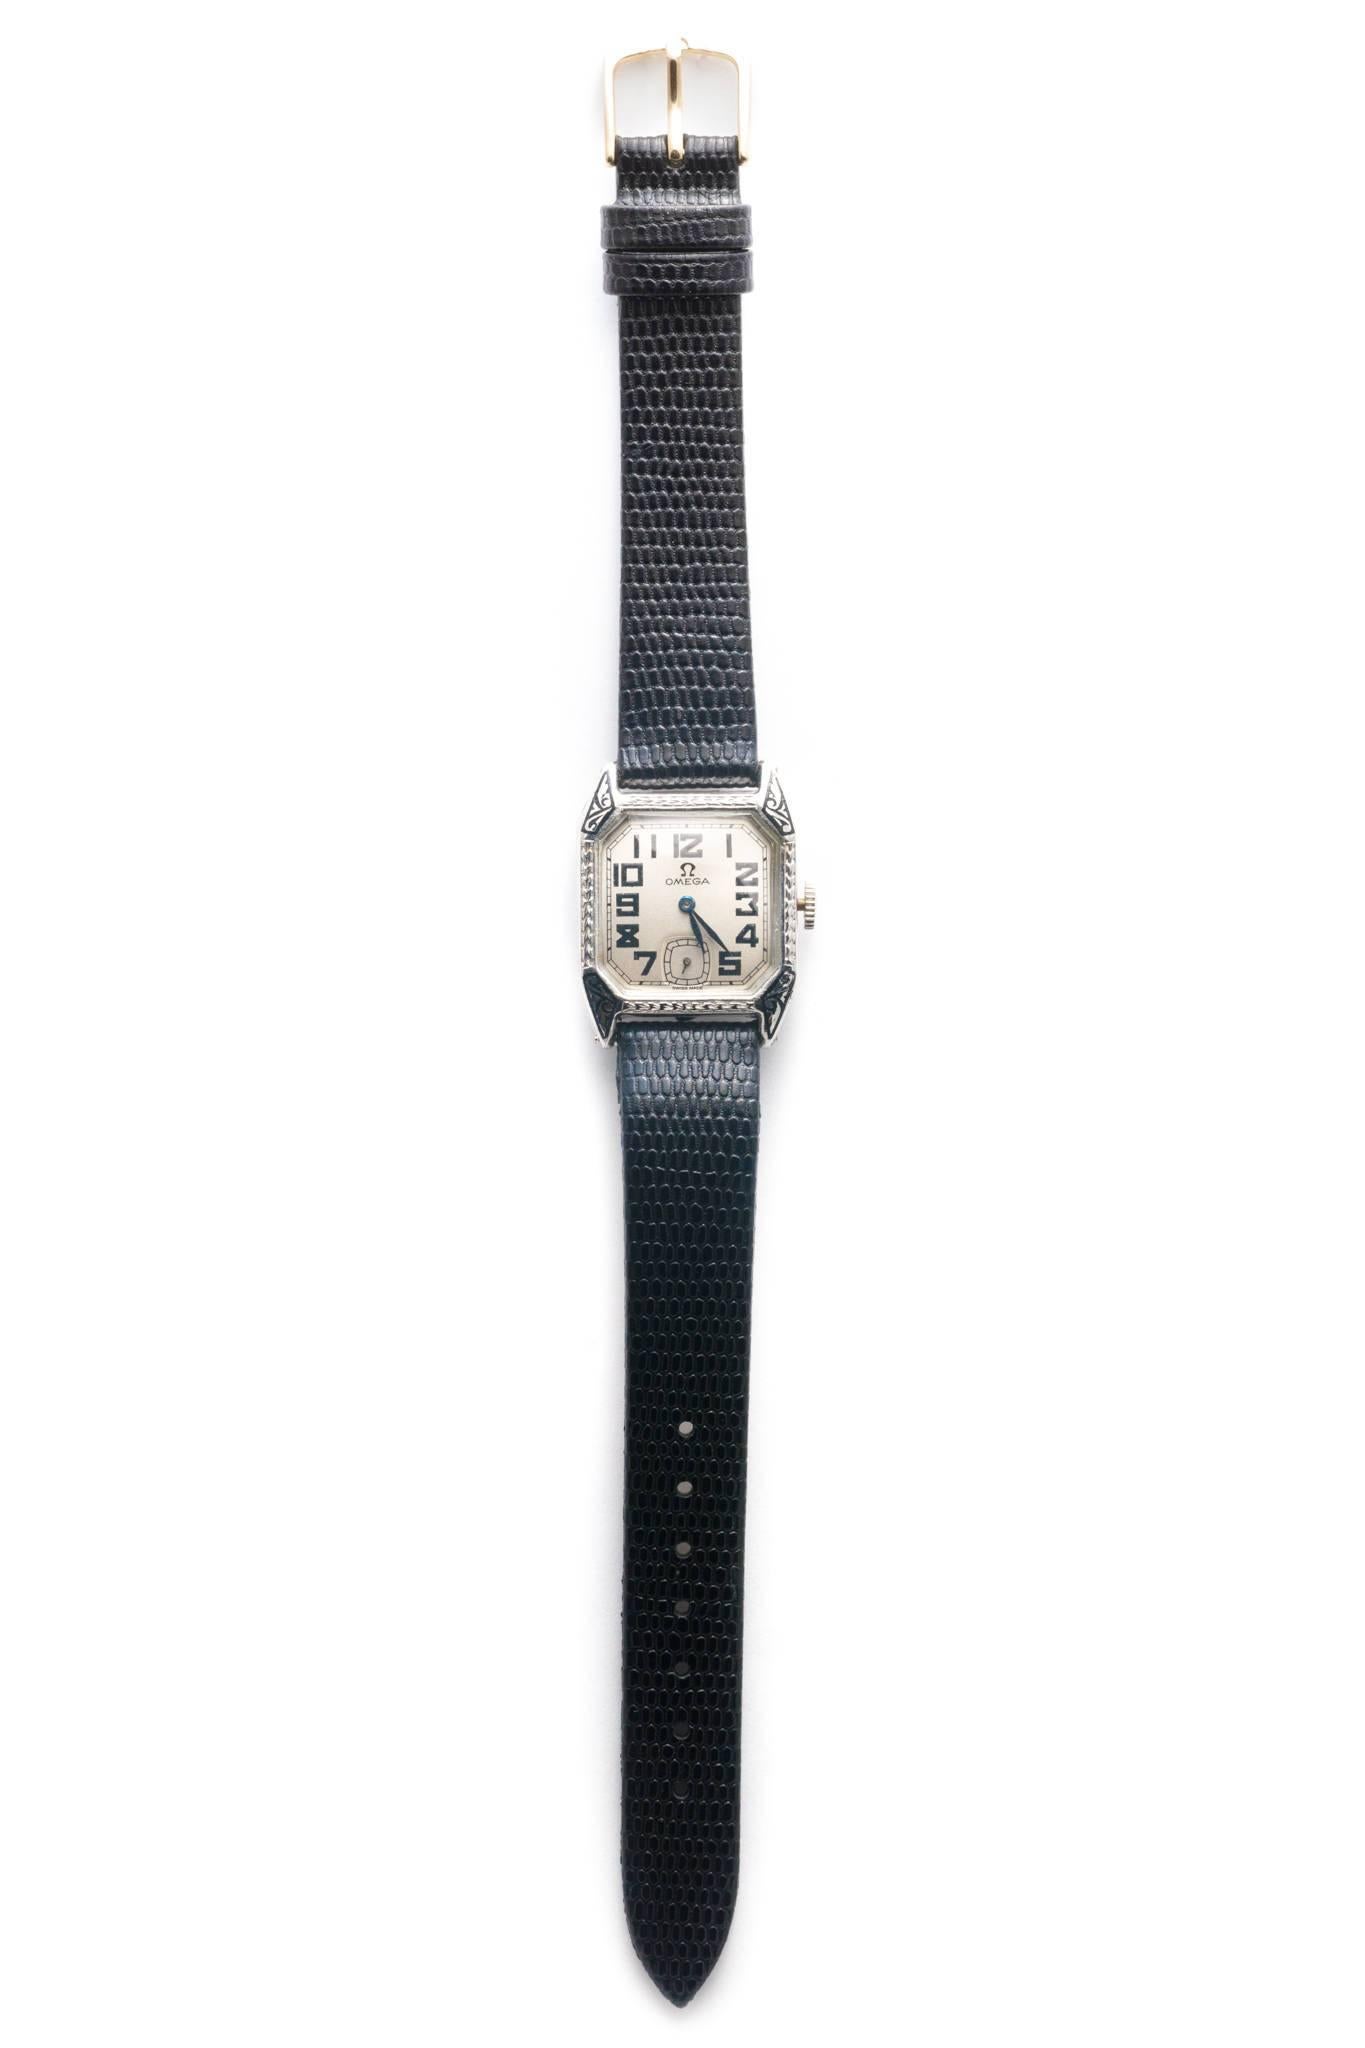 Beacon Hill Jewelers Presents:

A vintage mens art deco period Omega wrist watch in 14 karat white gold. Boasting beautiful hand engraving, and enameling on the brightly polished 14 karat white gold case, this vintage watch is in like new condition